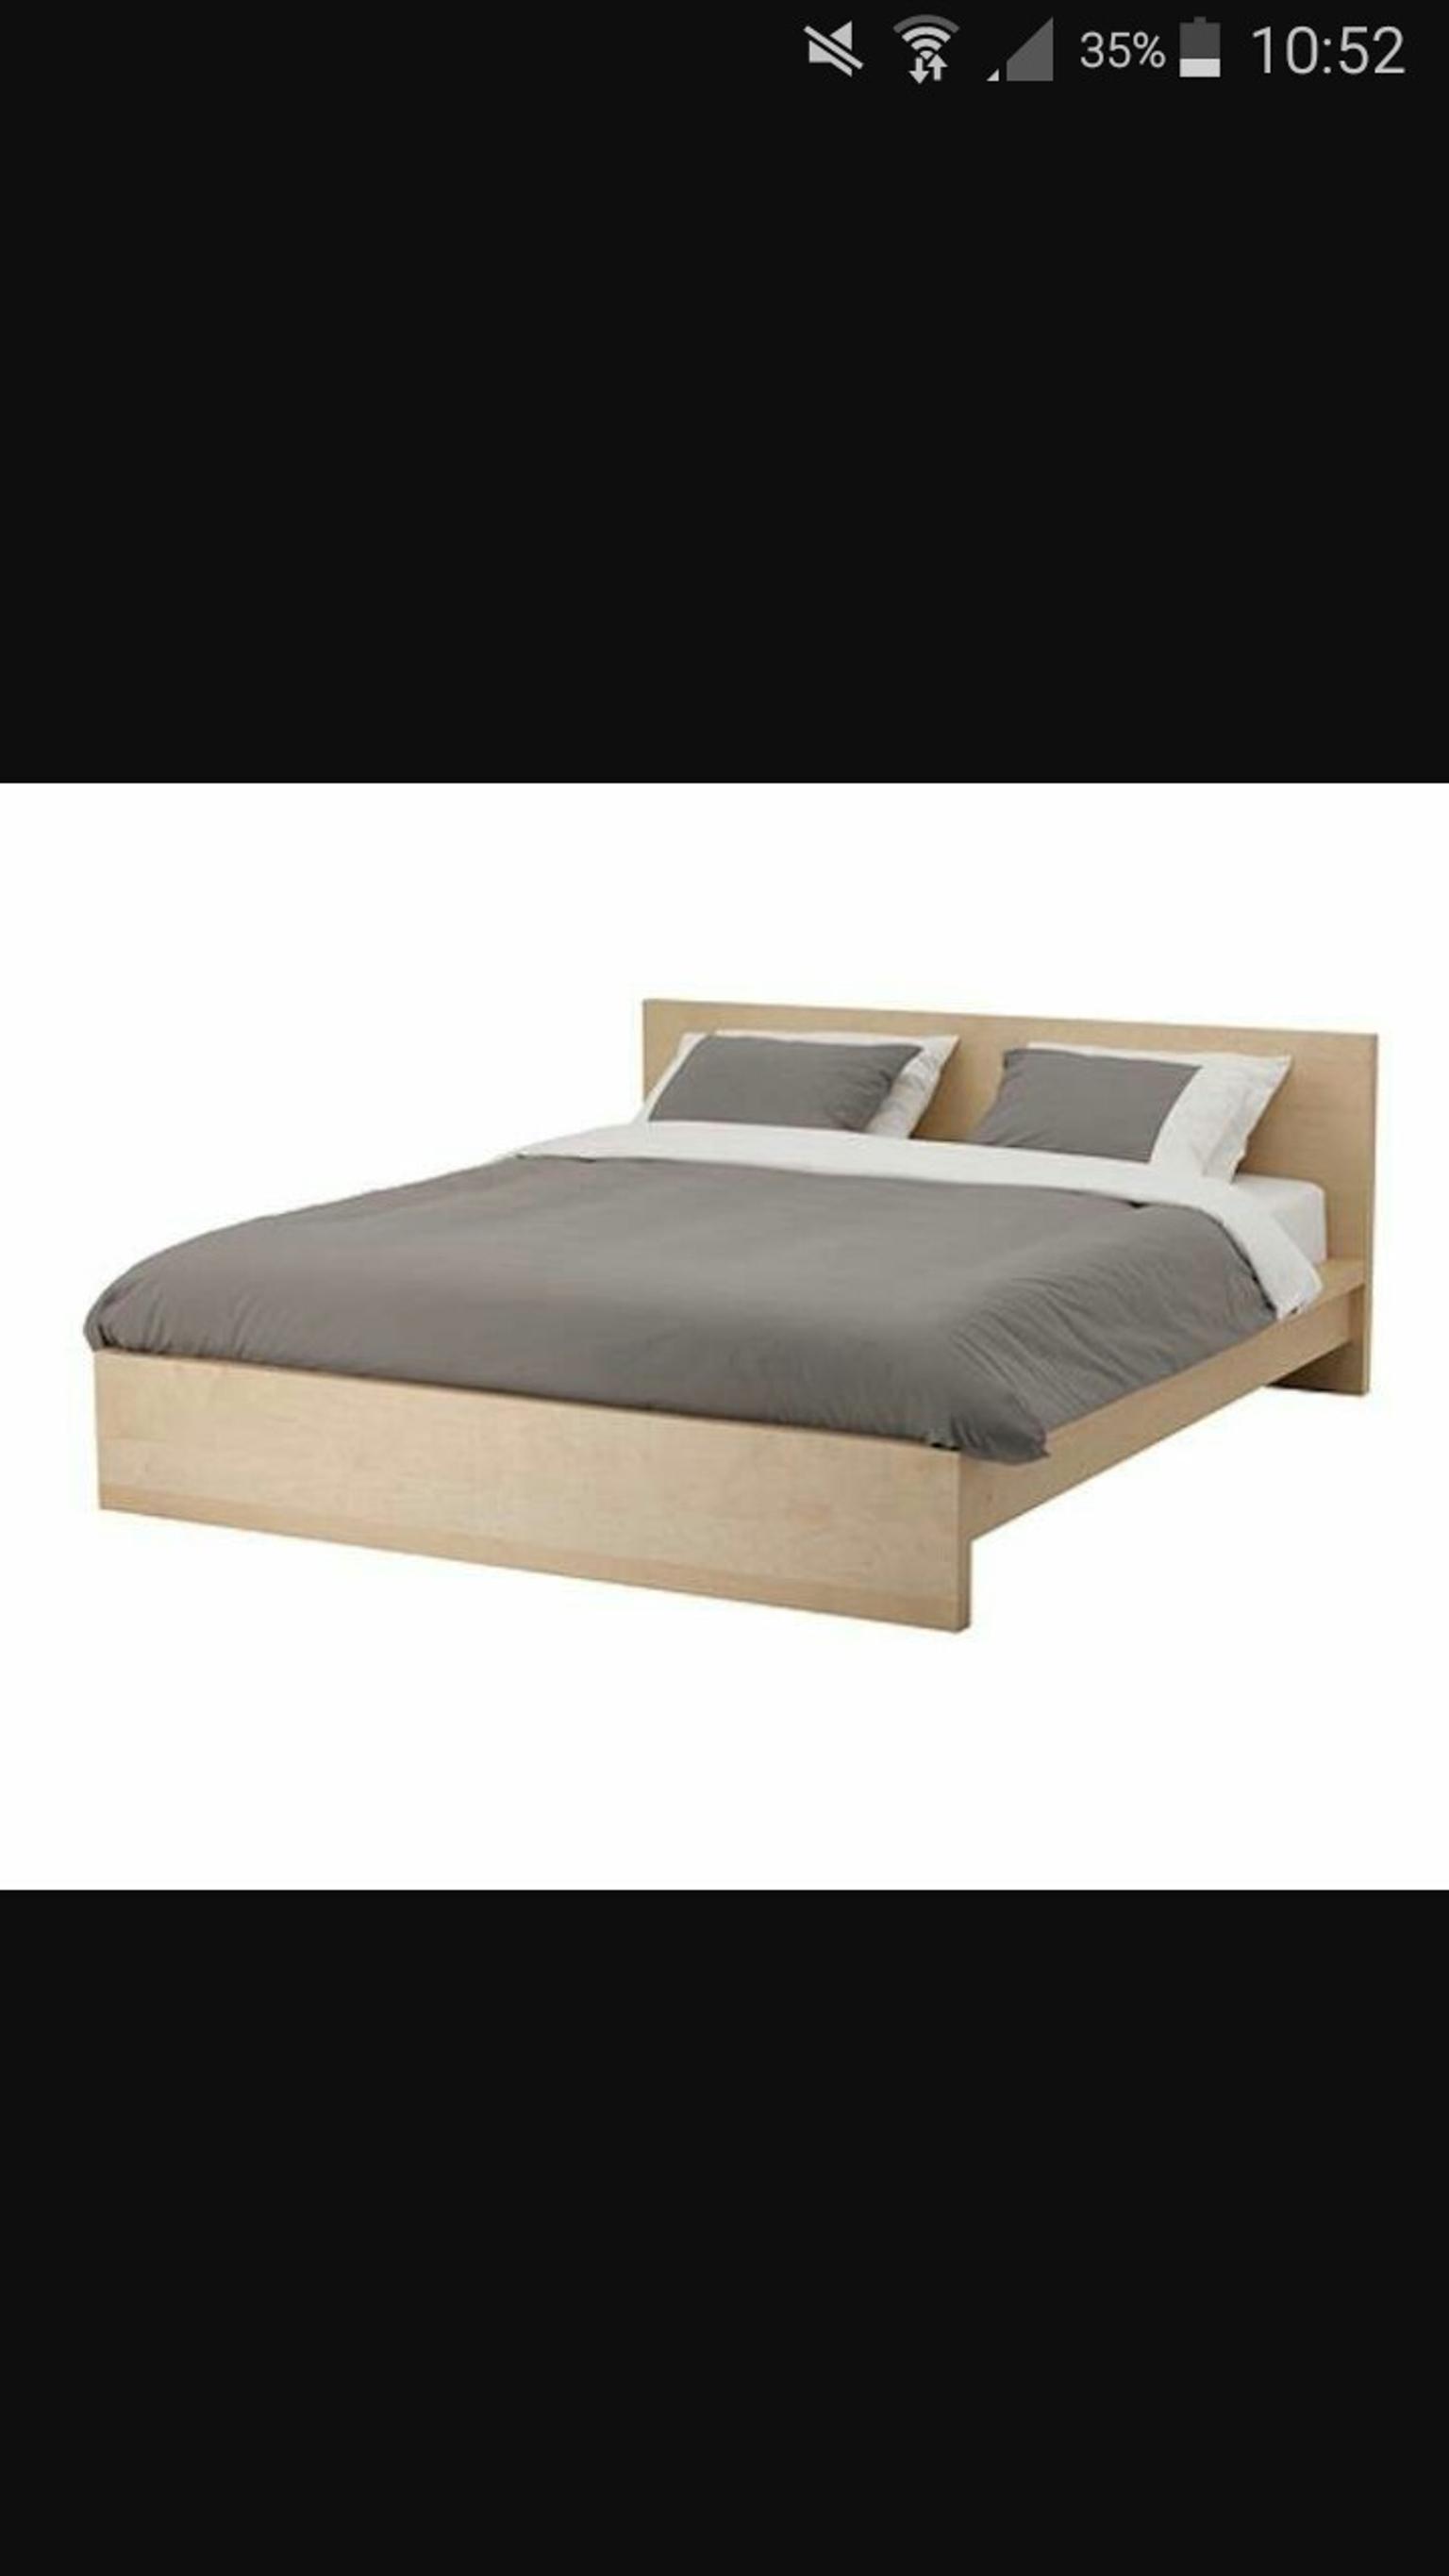 Letto Malm Ikea In 50125 Firenze For 100 00 For Sale Shpock